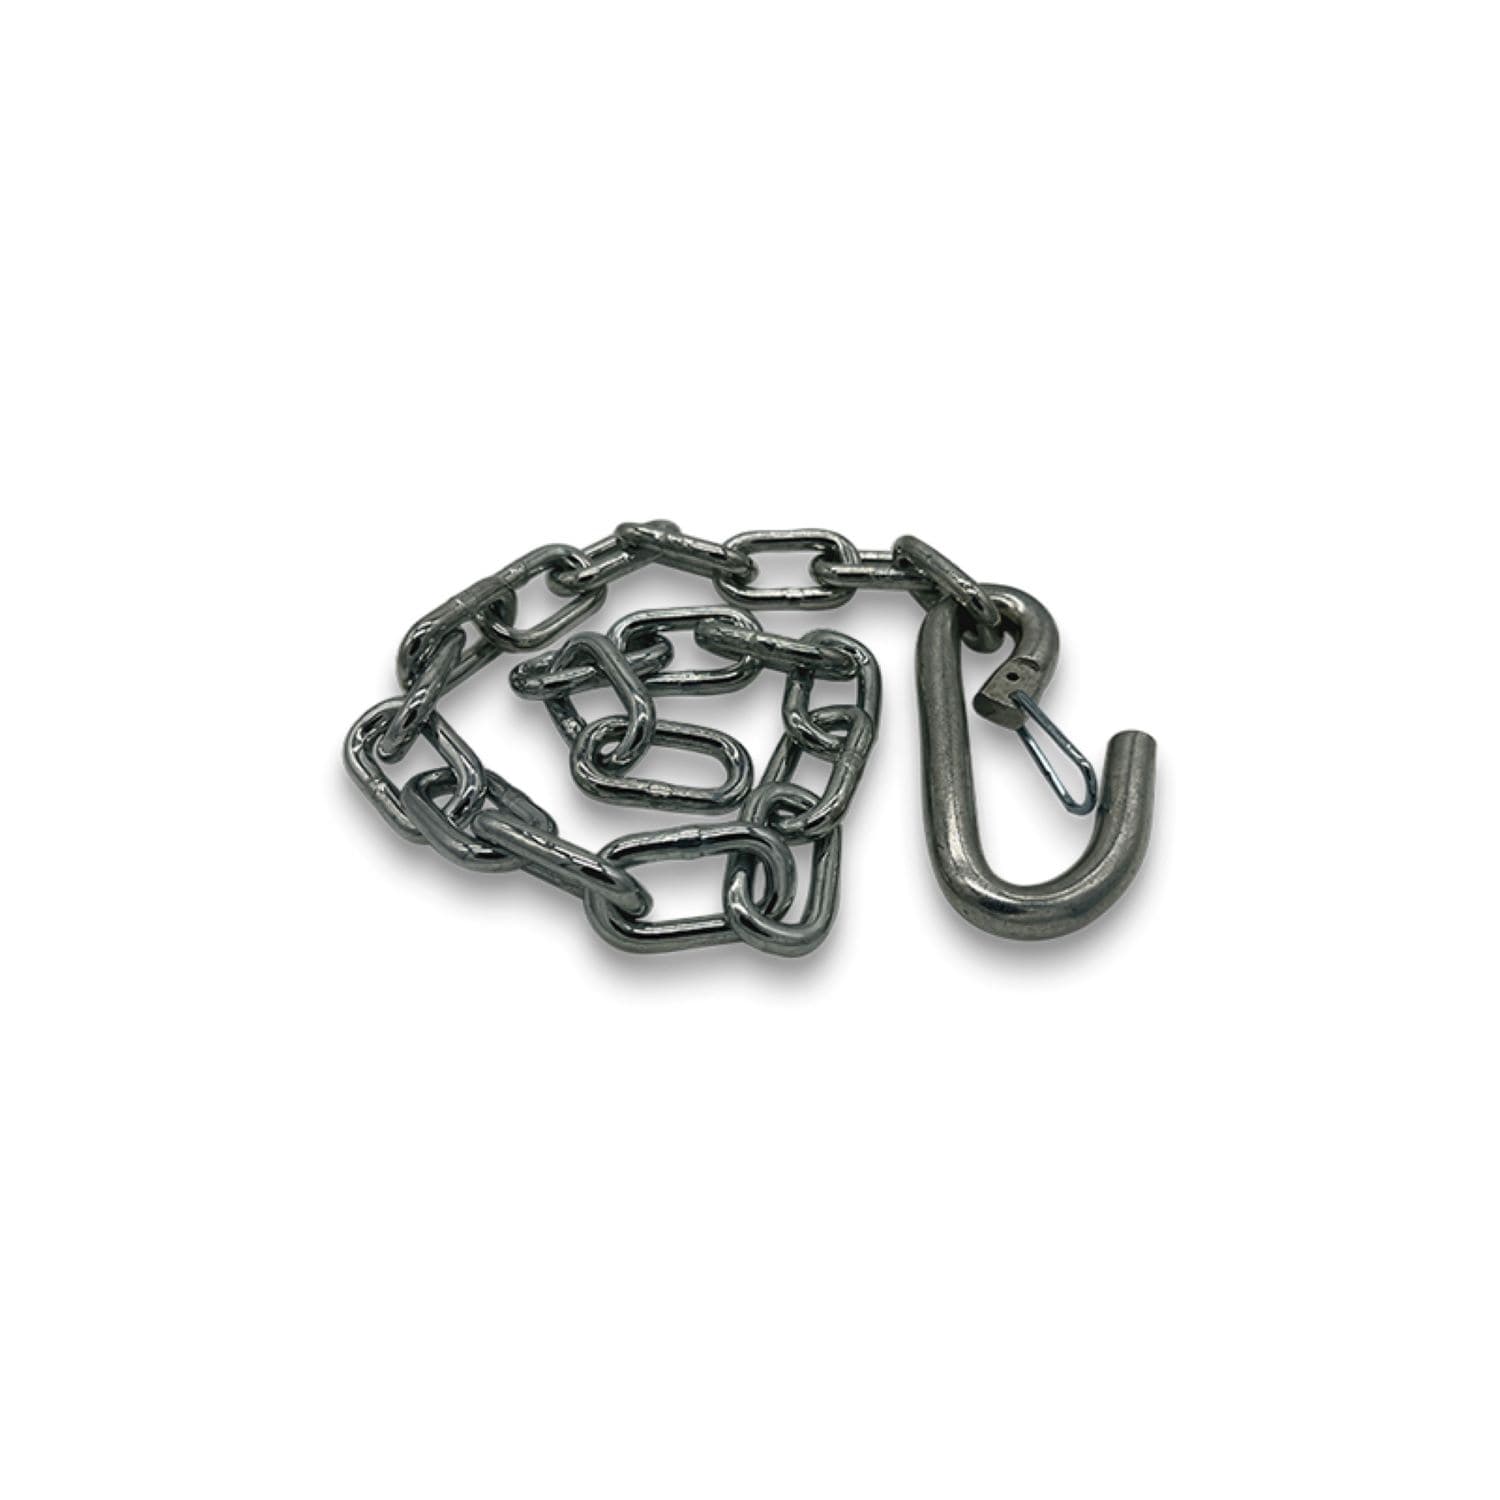 Safety Chain For Trailer